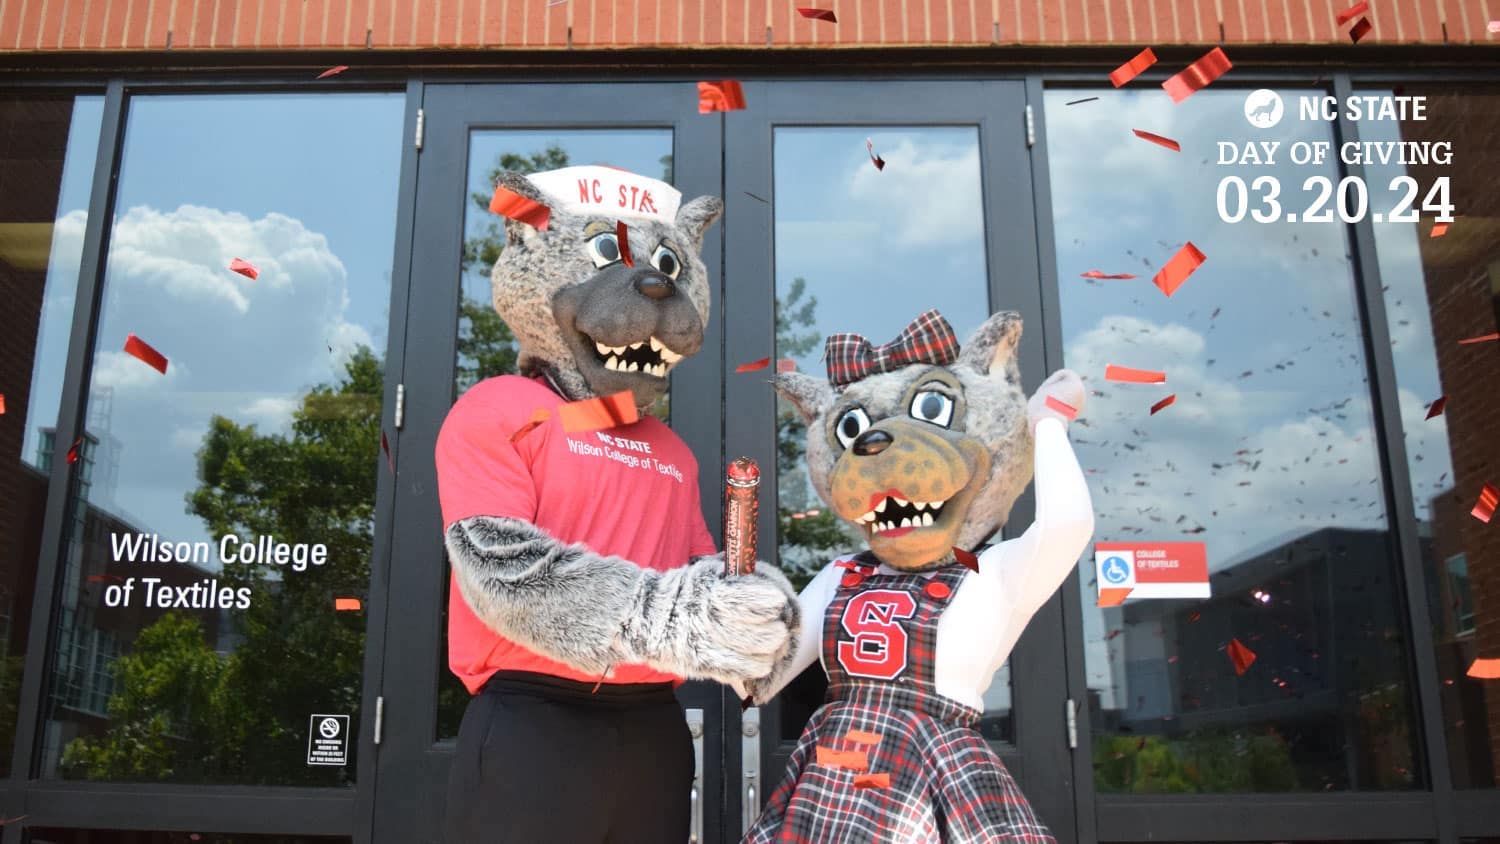 Mr. and Ms. Wuf celebrating in front of the Wilson College of Textiles